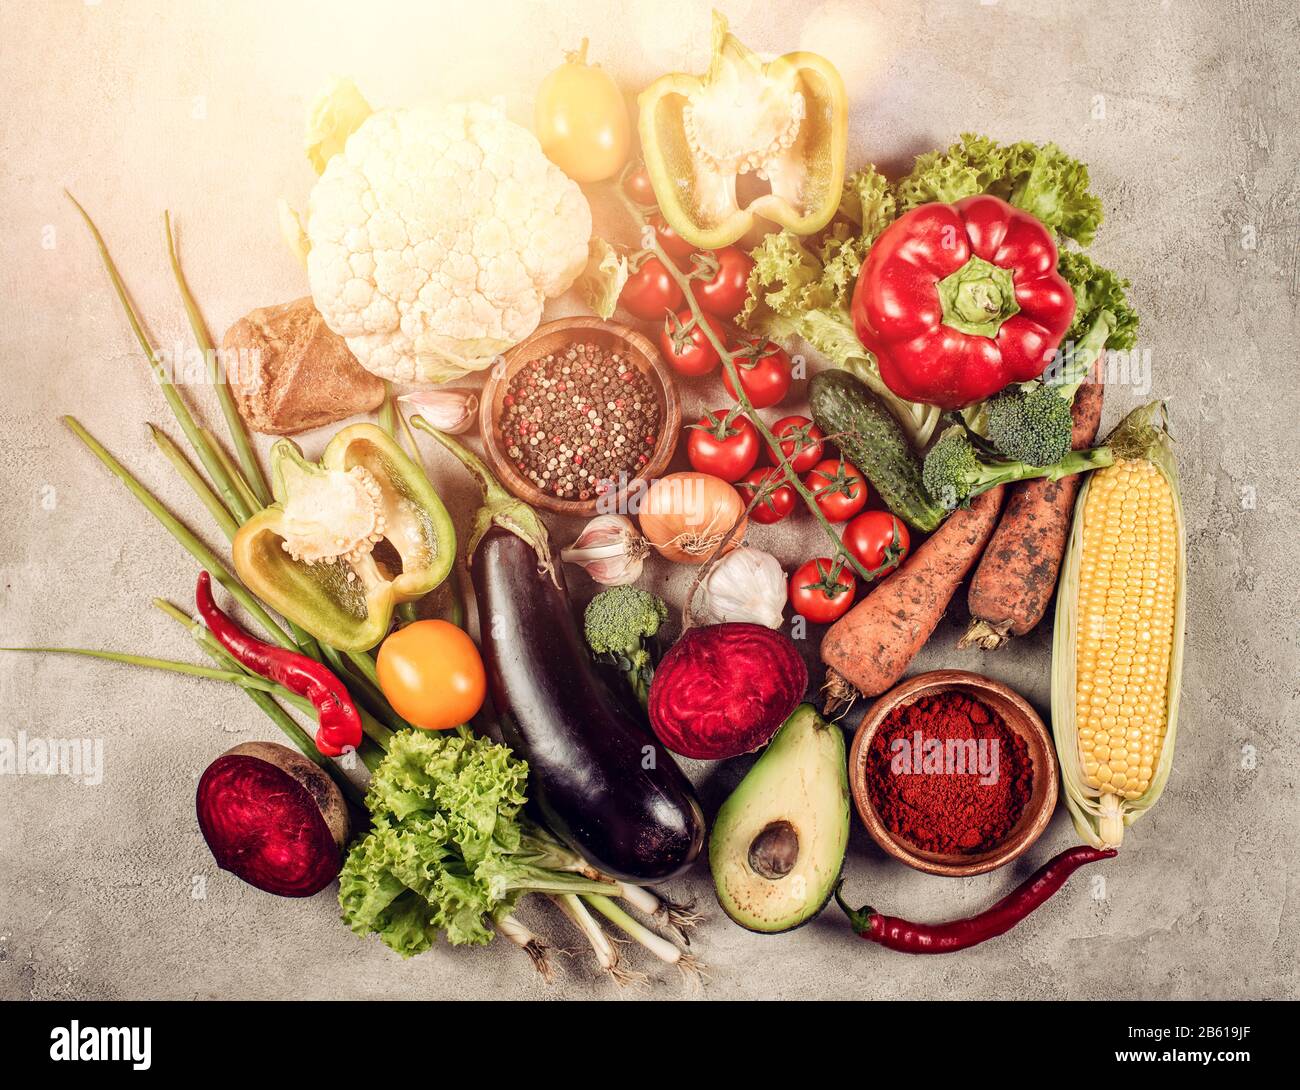 Healthy background of vegetable. Concept of genuine food Stock Photo